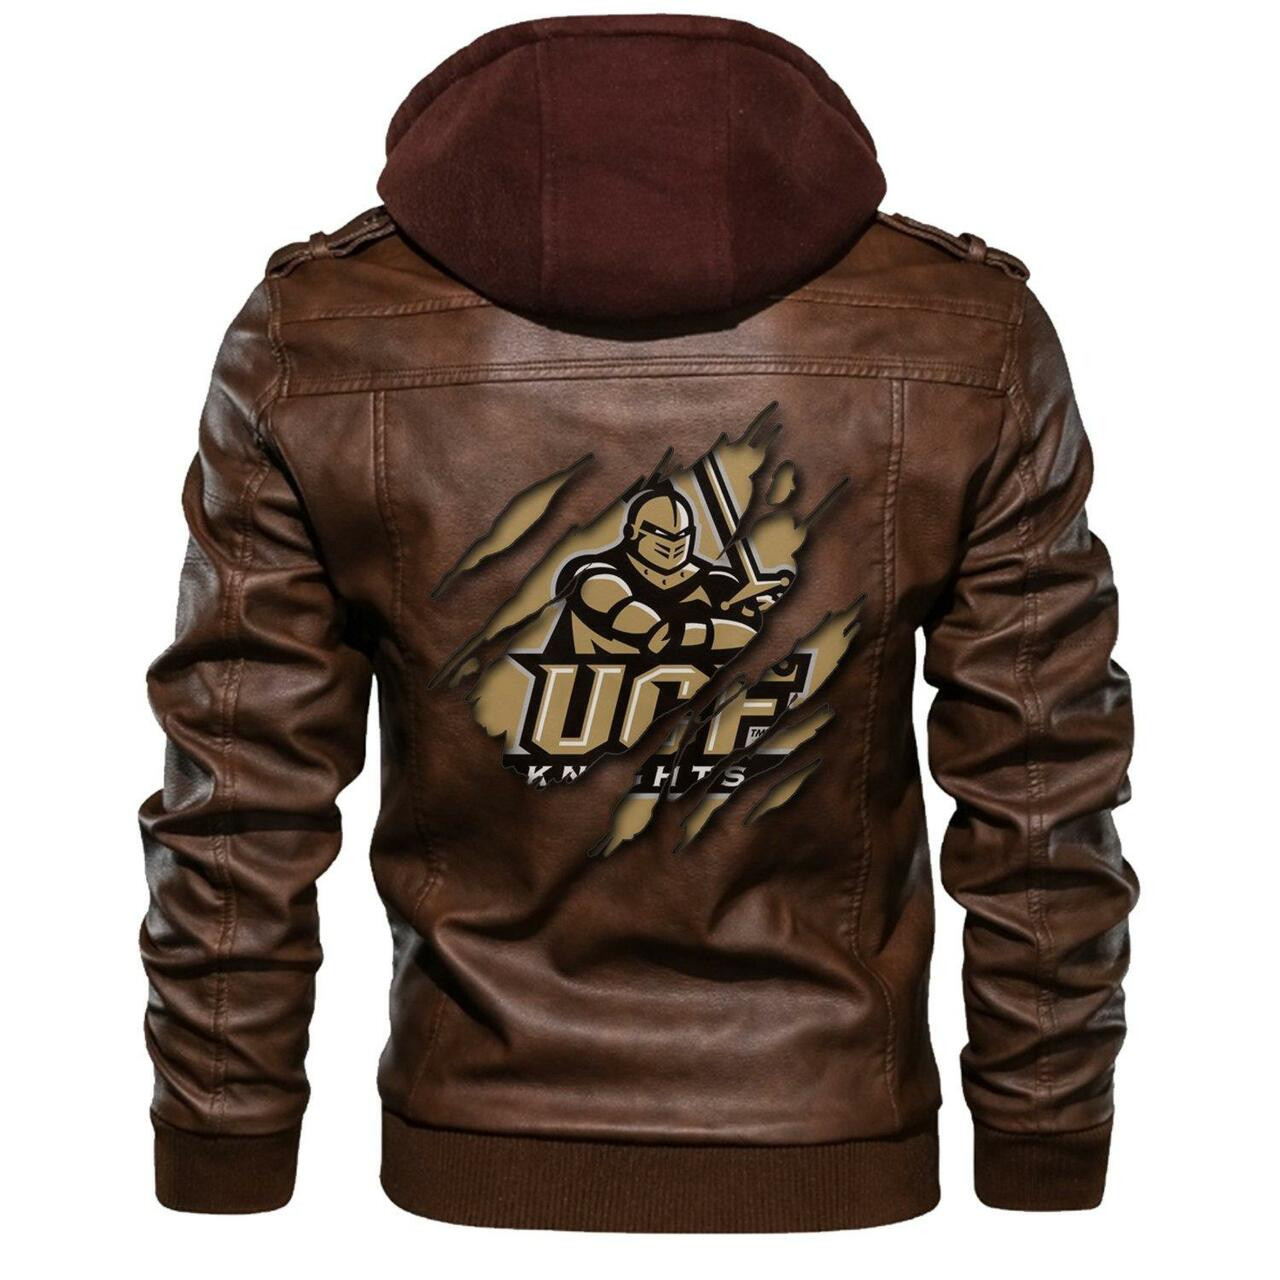 Don't wait another minute, Get Hot Leather Jacket today 146